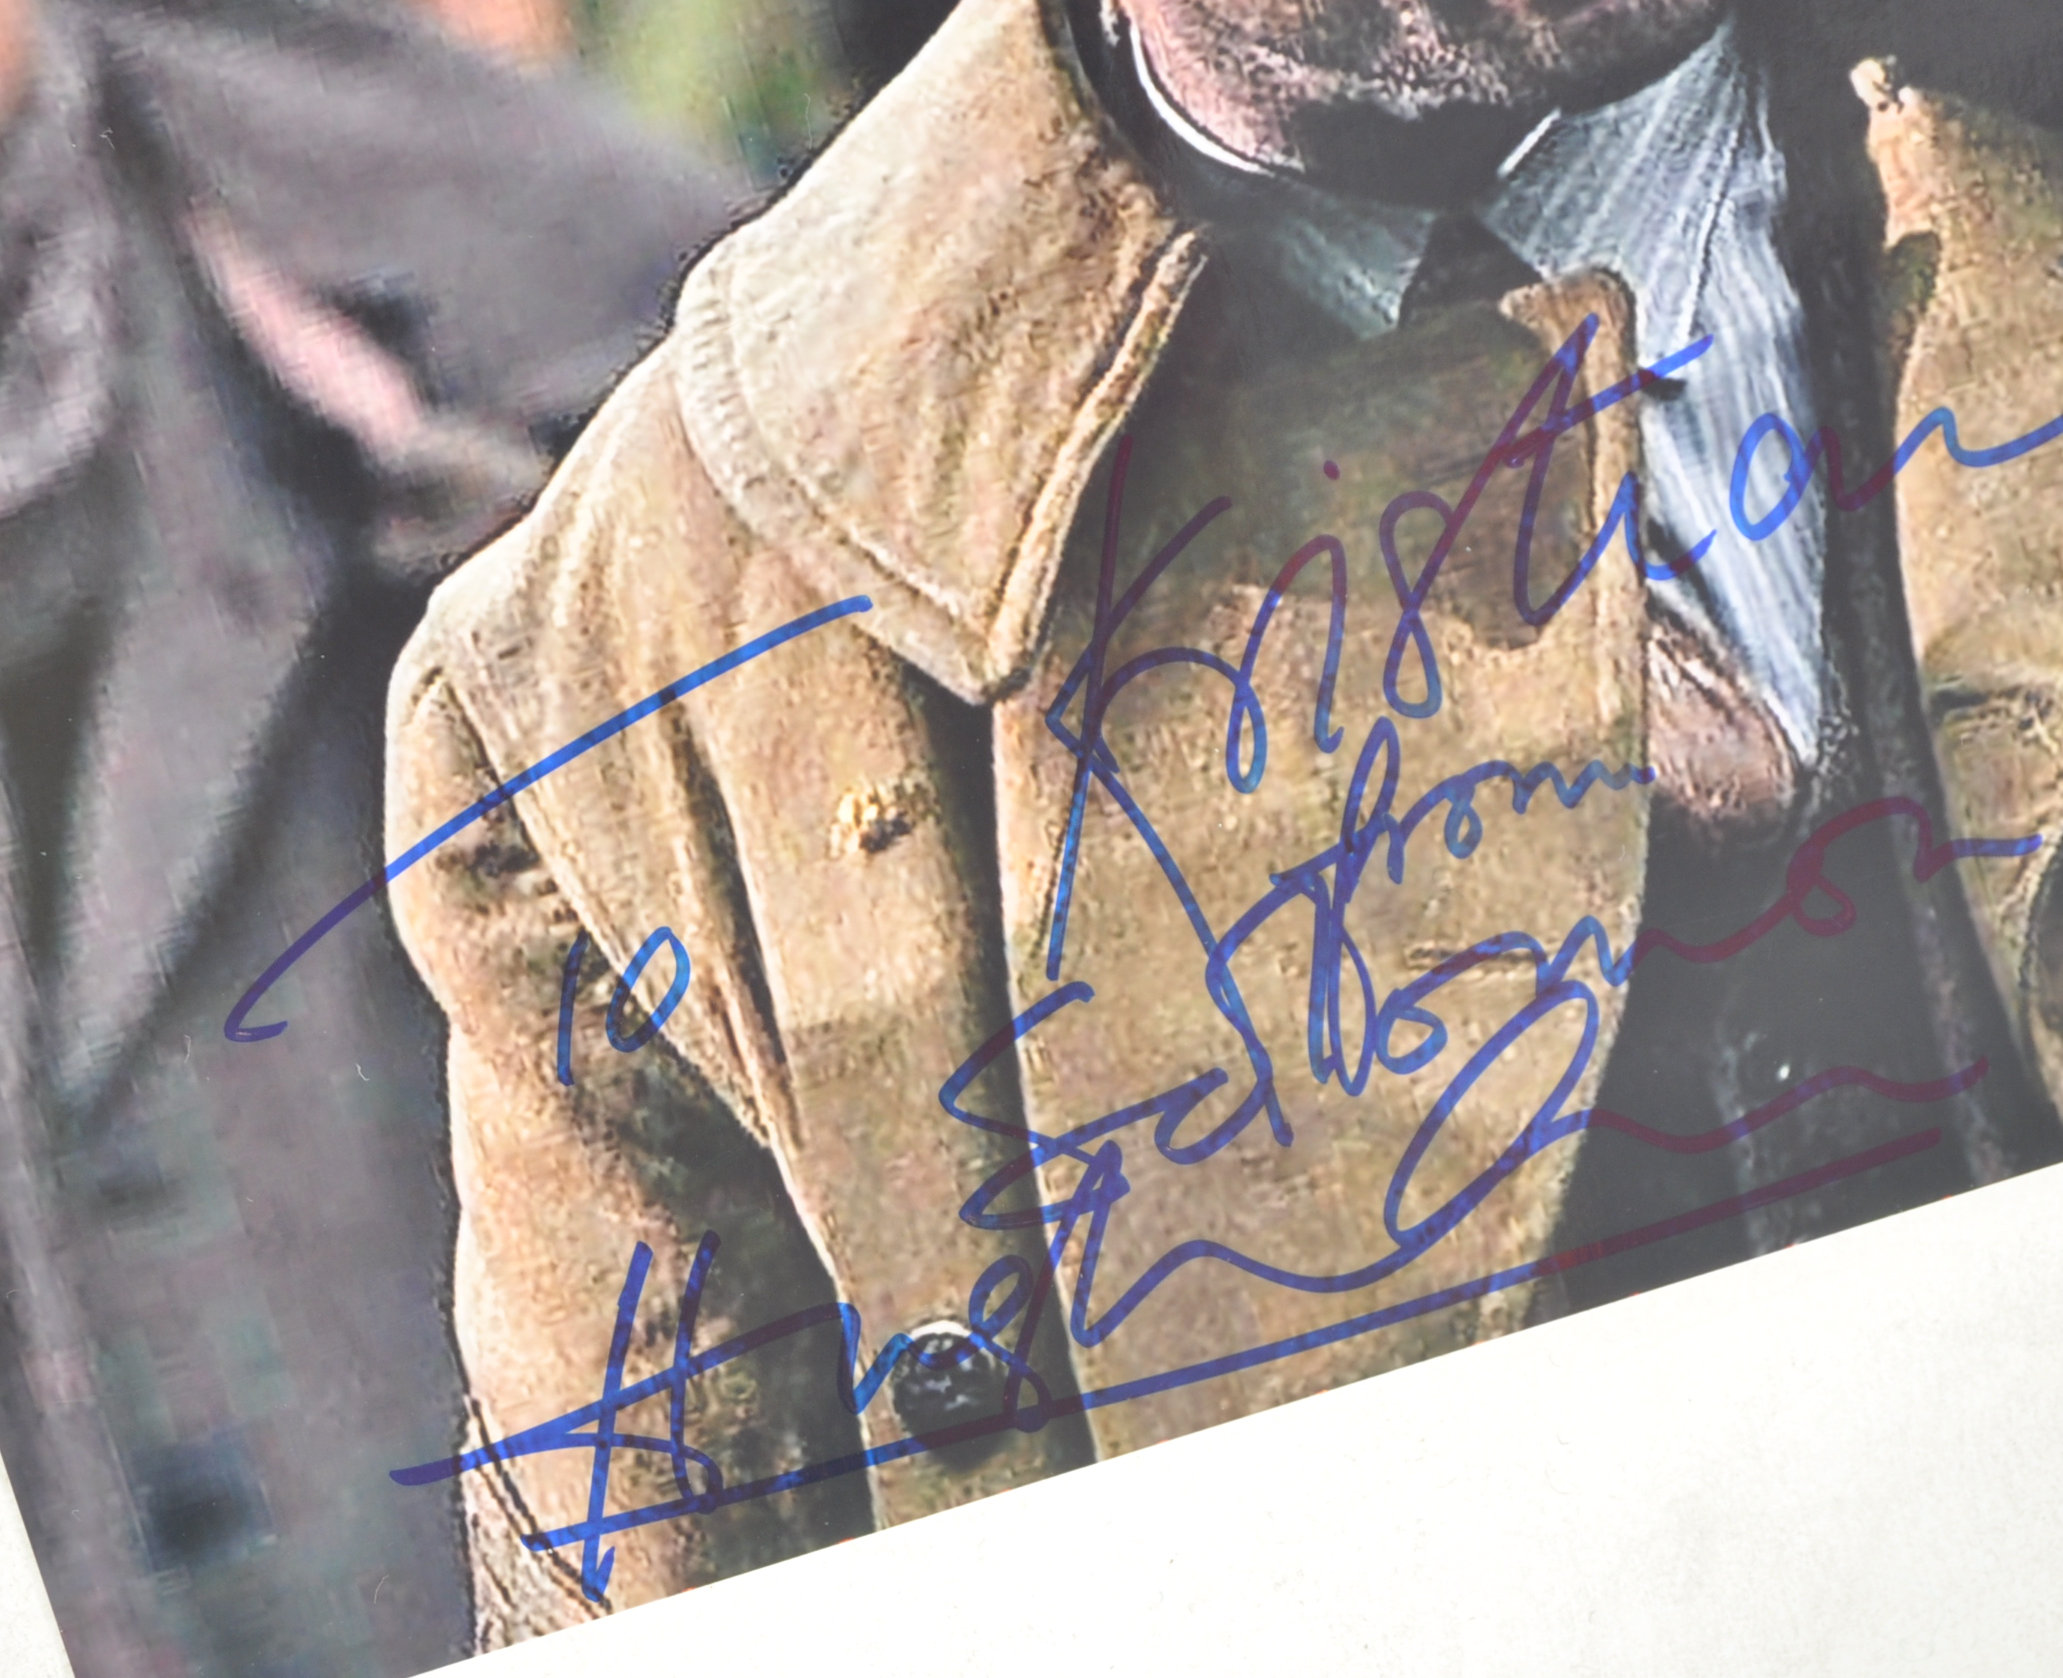 DOCTOR WHO - COLLECTION OF SIGNED 8X10" PHOTOGRAPHS - Image 4 of 19